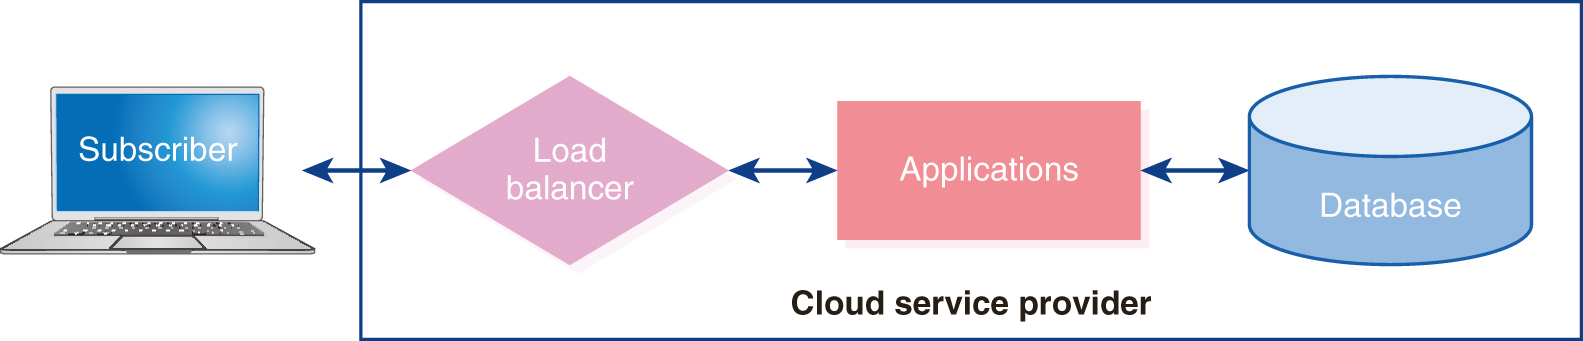 An illustration shows the elements in a subscribed cloud service.